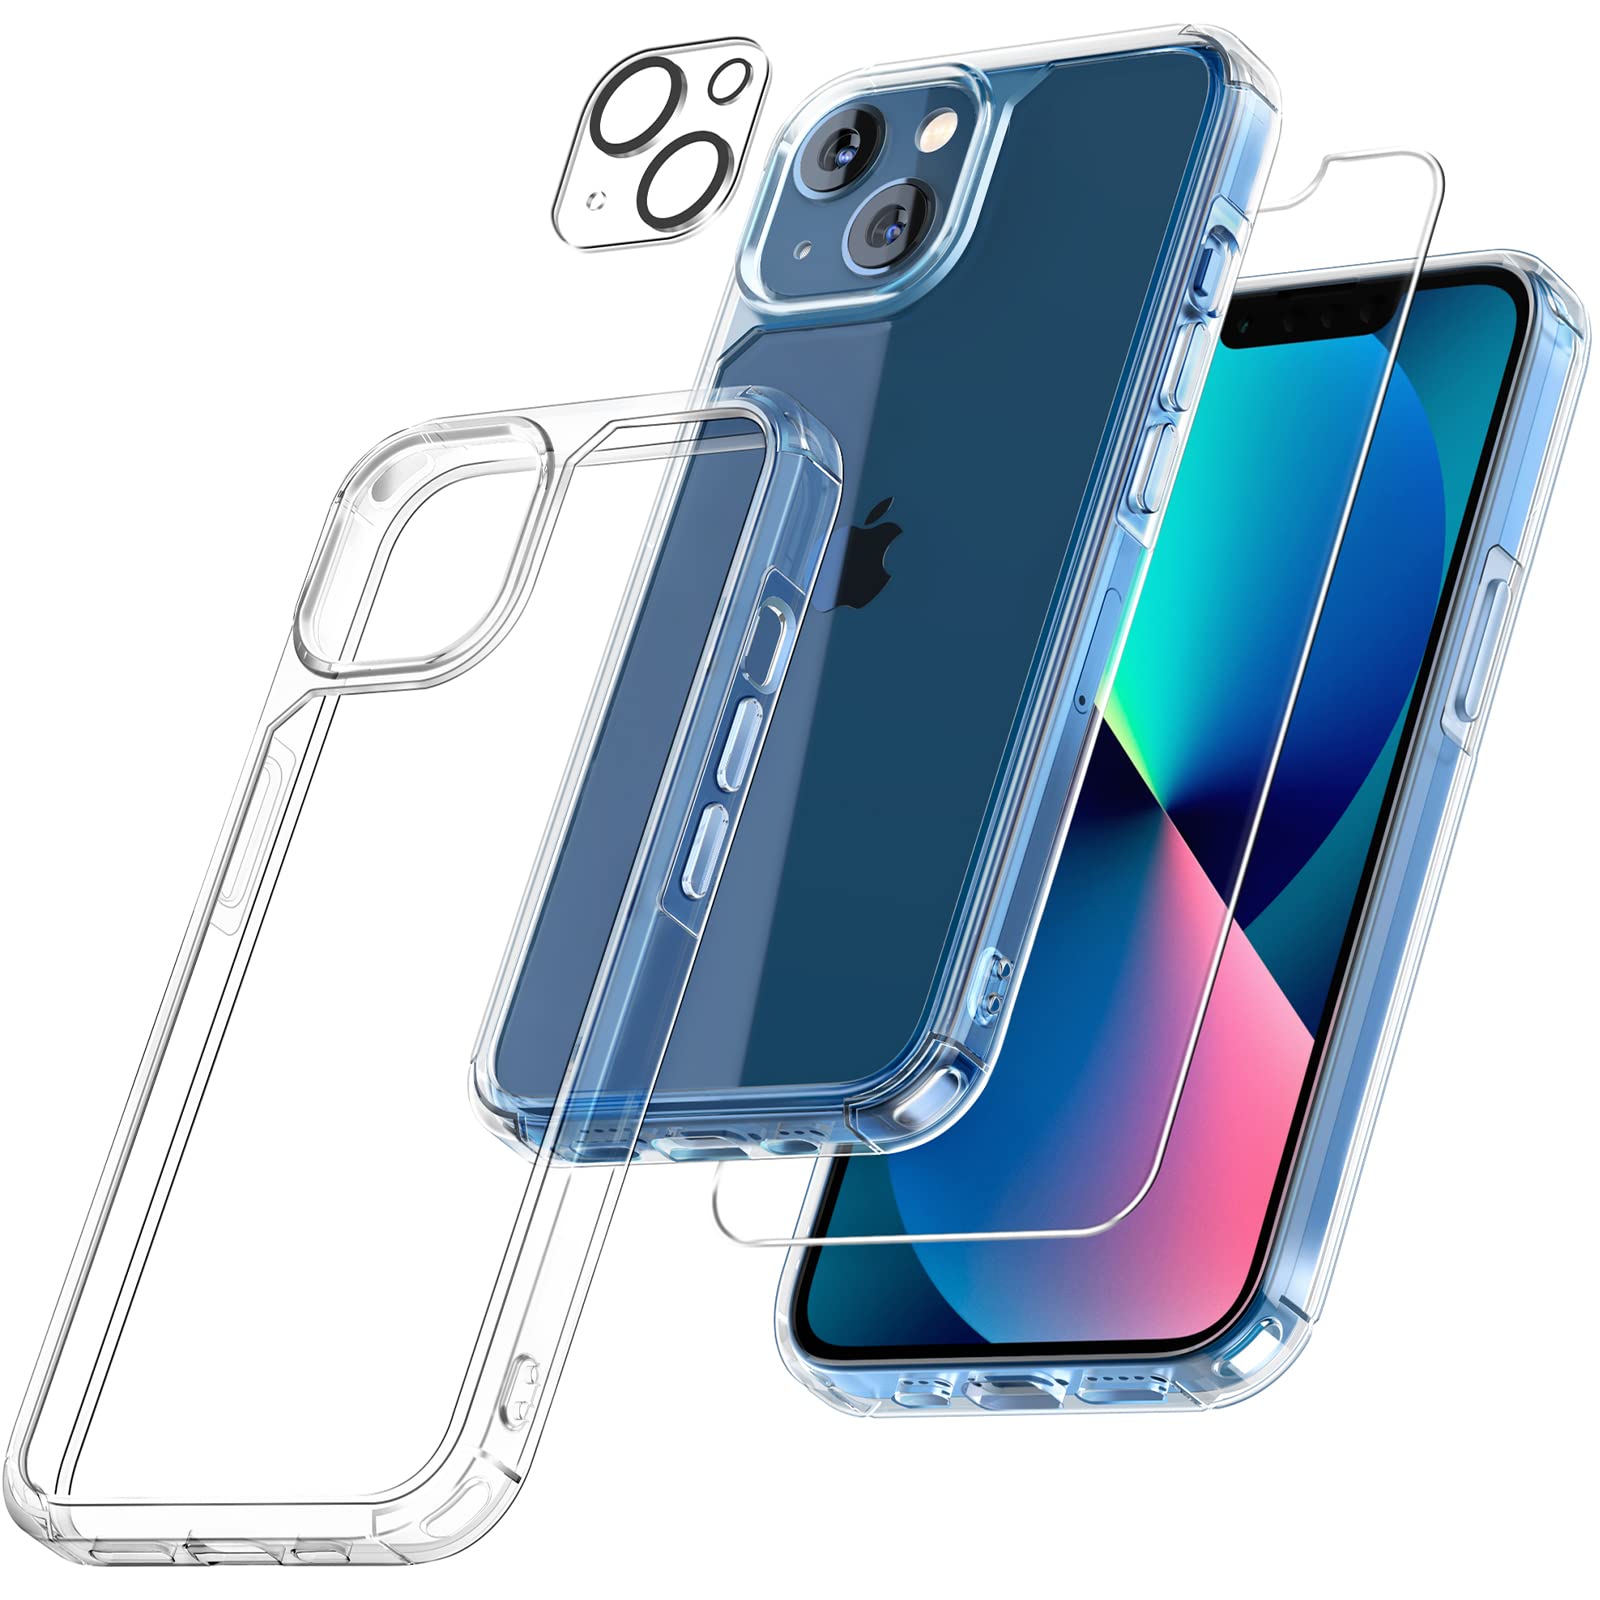 TAURI 5 in 1 Designed for iPhone 13 Case Clear, [Not-Yellowing] with 2X Tempered Glass Screen Protector + 2X Camera Lens Protector, [Military-Grade Drop Tested] Shockproof Slim Phone Case 6.1 inch